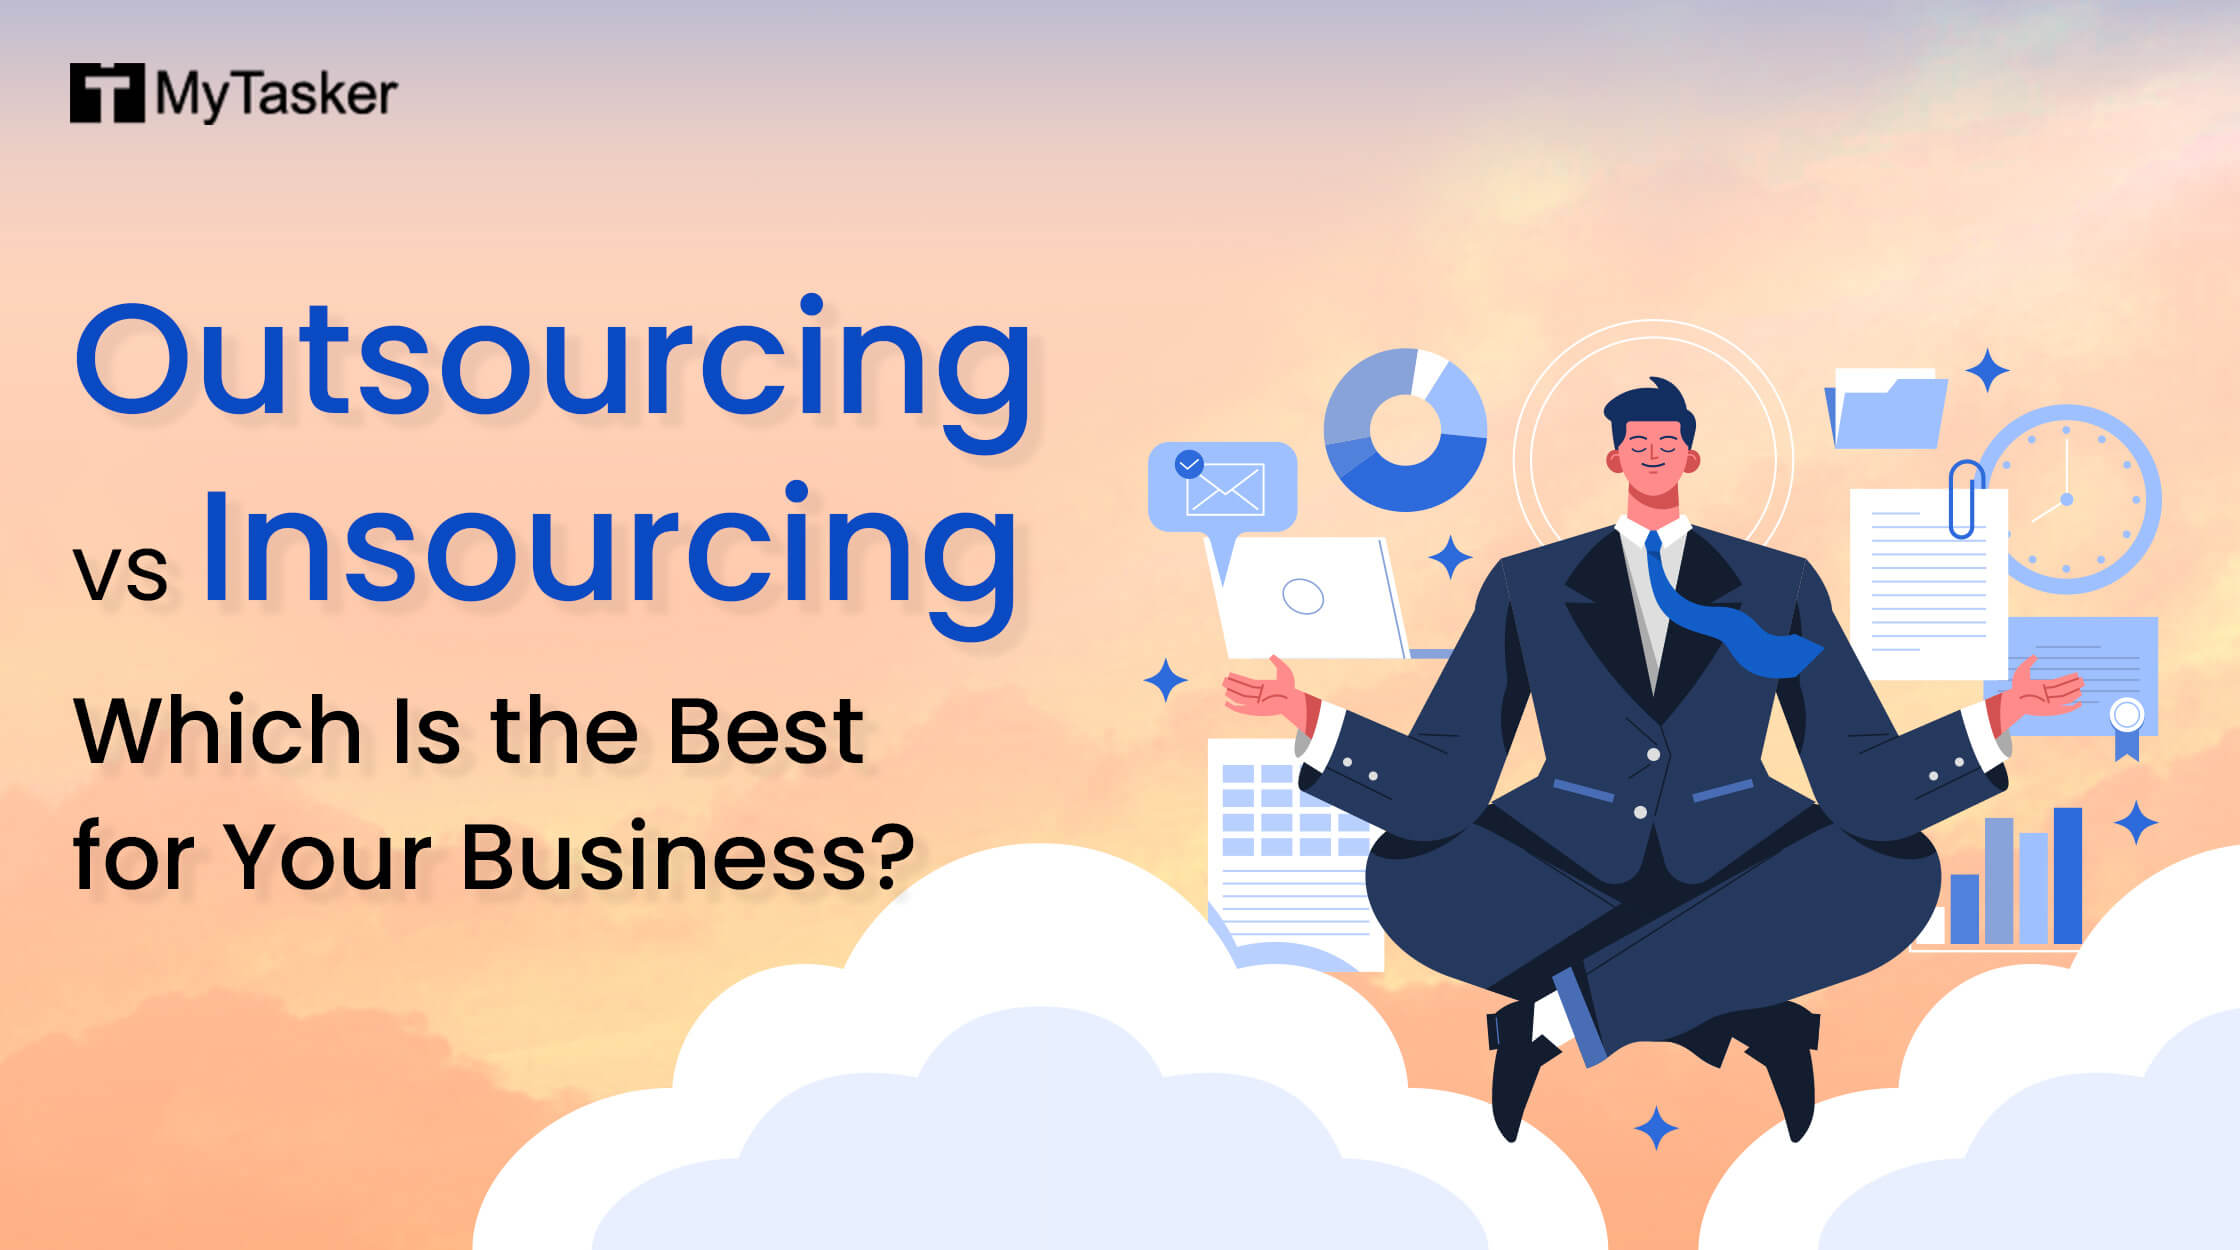 Outsourcing vs Insourcing: Which Is the Best for Your Business?